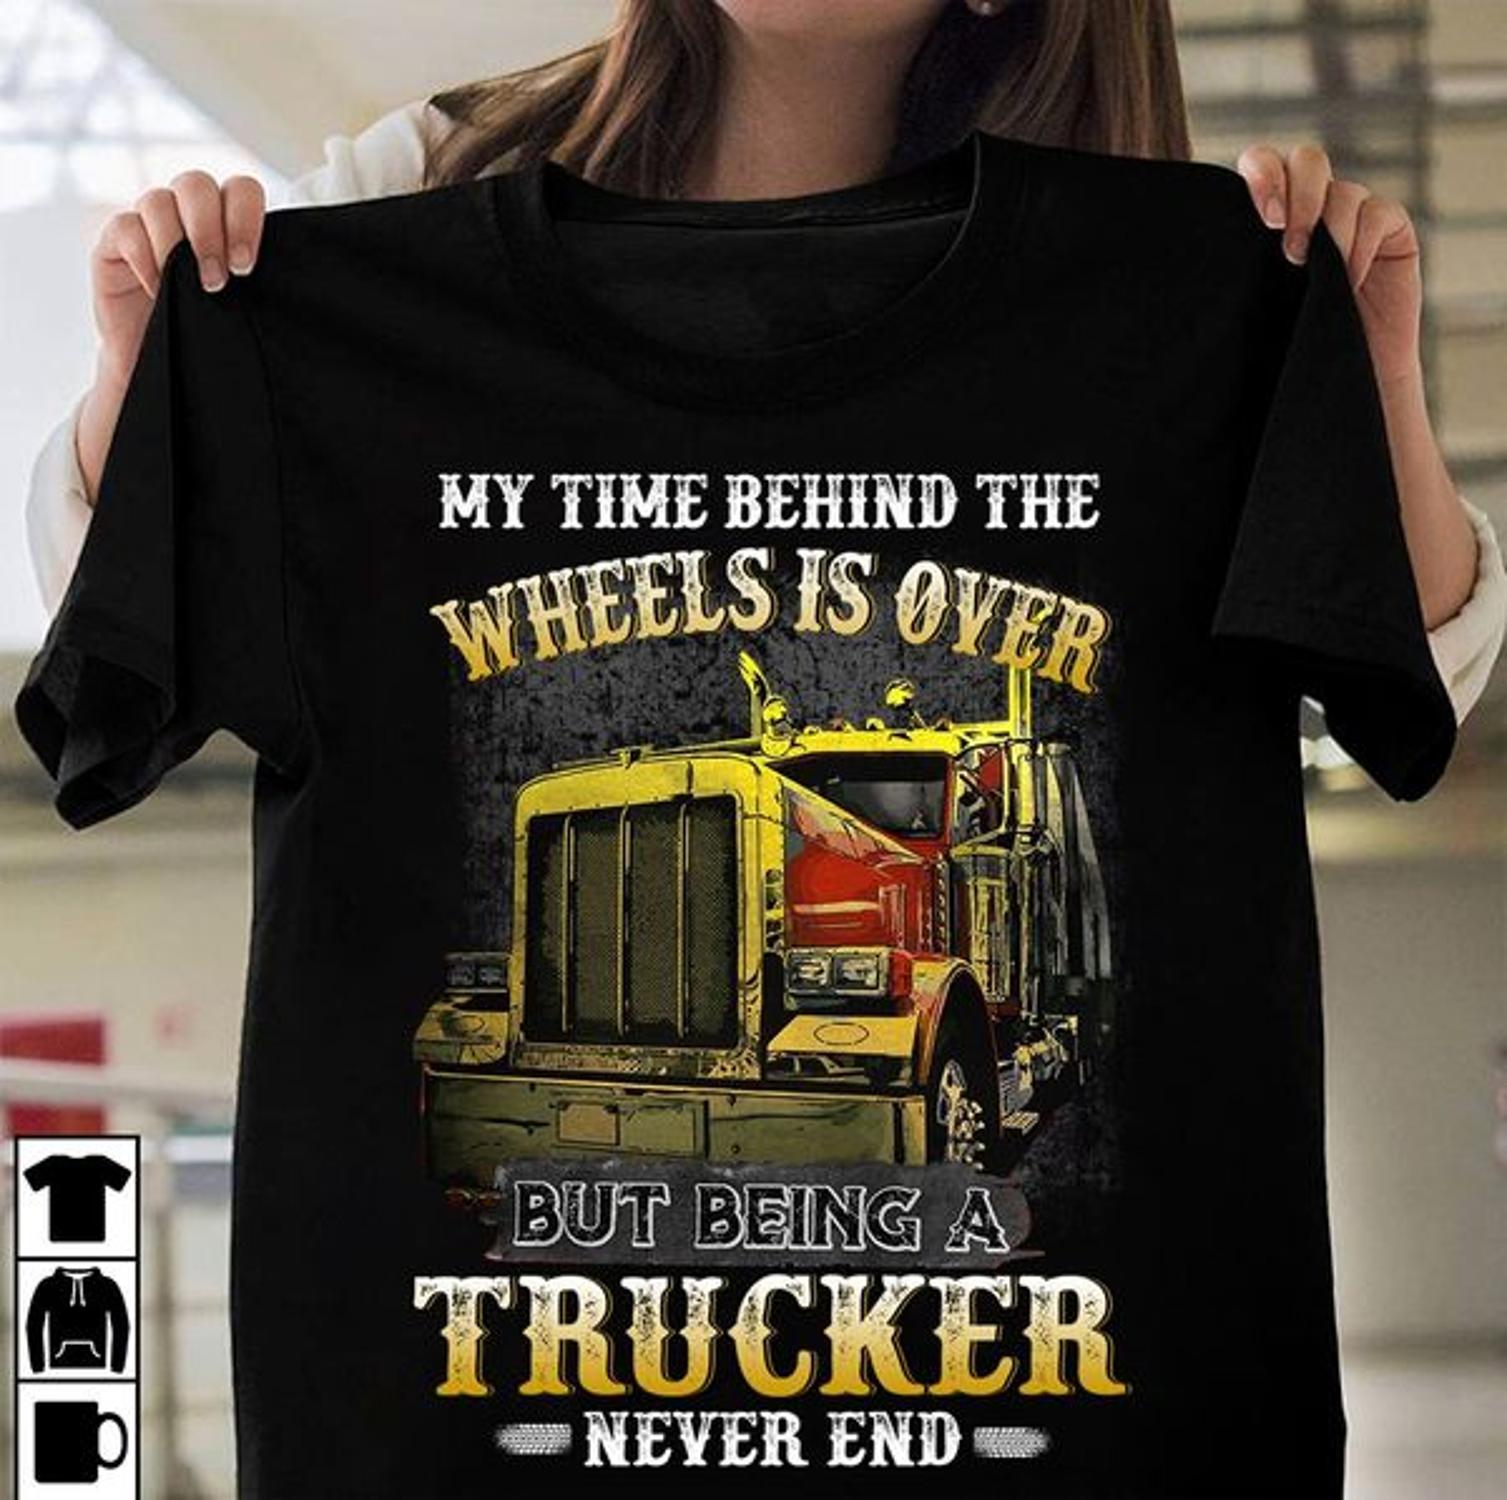 My time behind the wheels is over but being a trucker never end